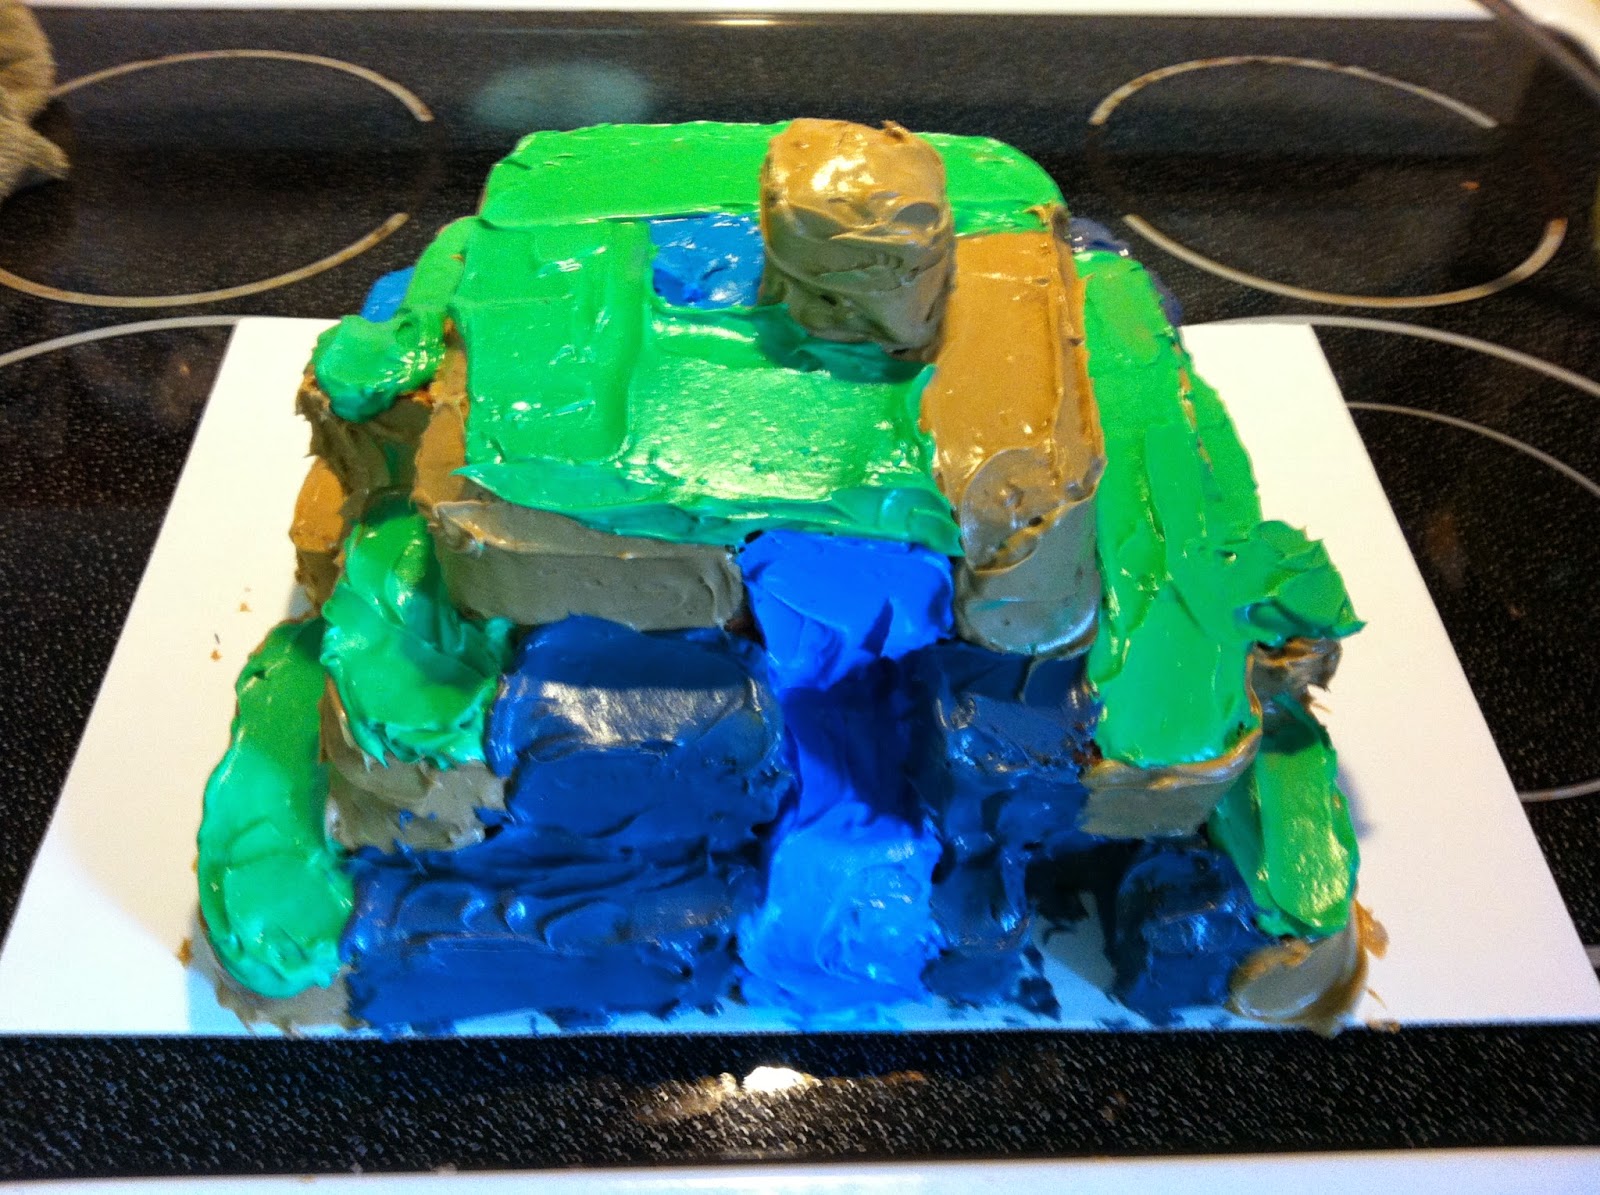 Minecraft cake side 1, featuring a waterfall.